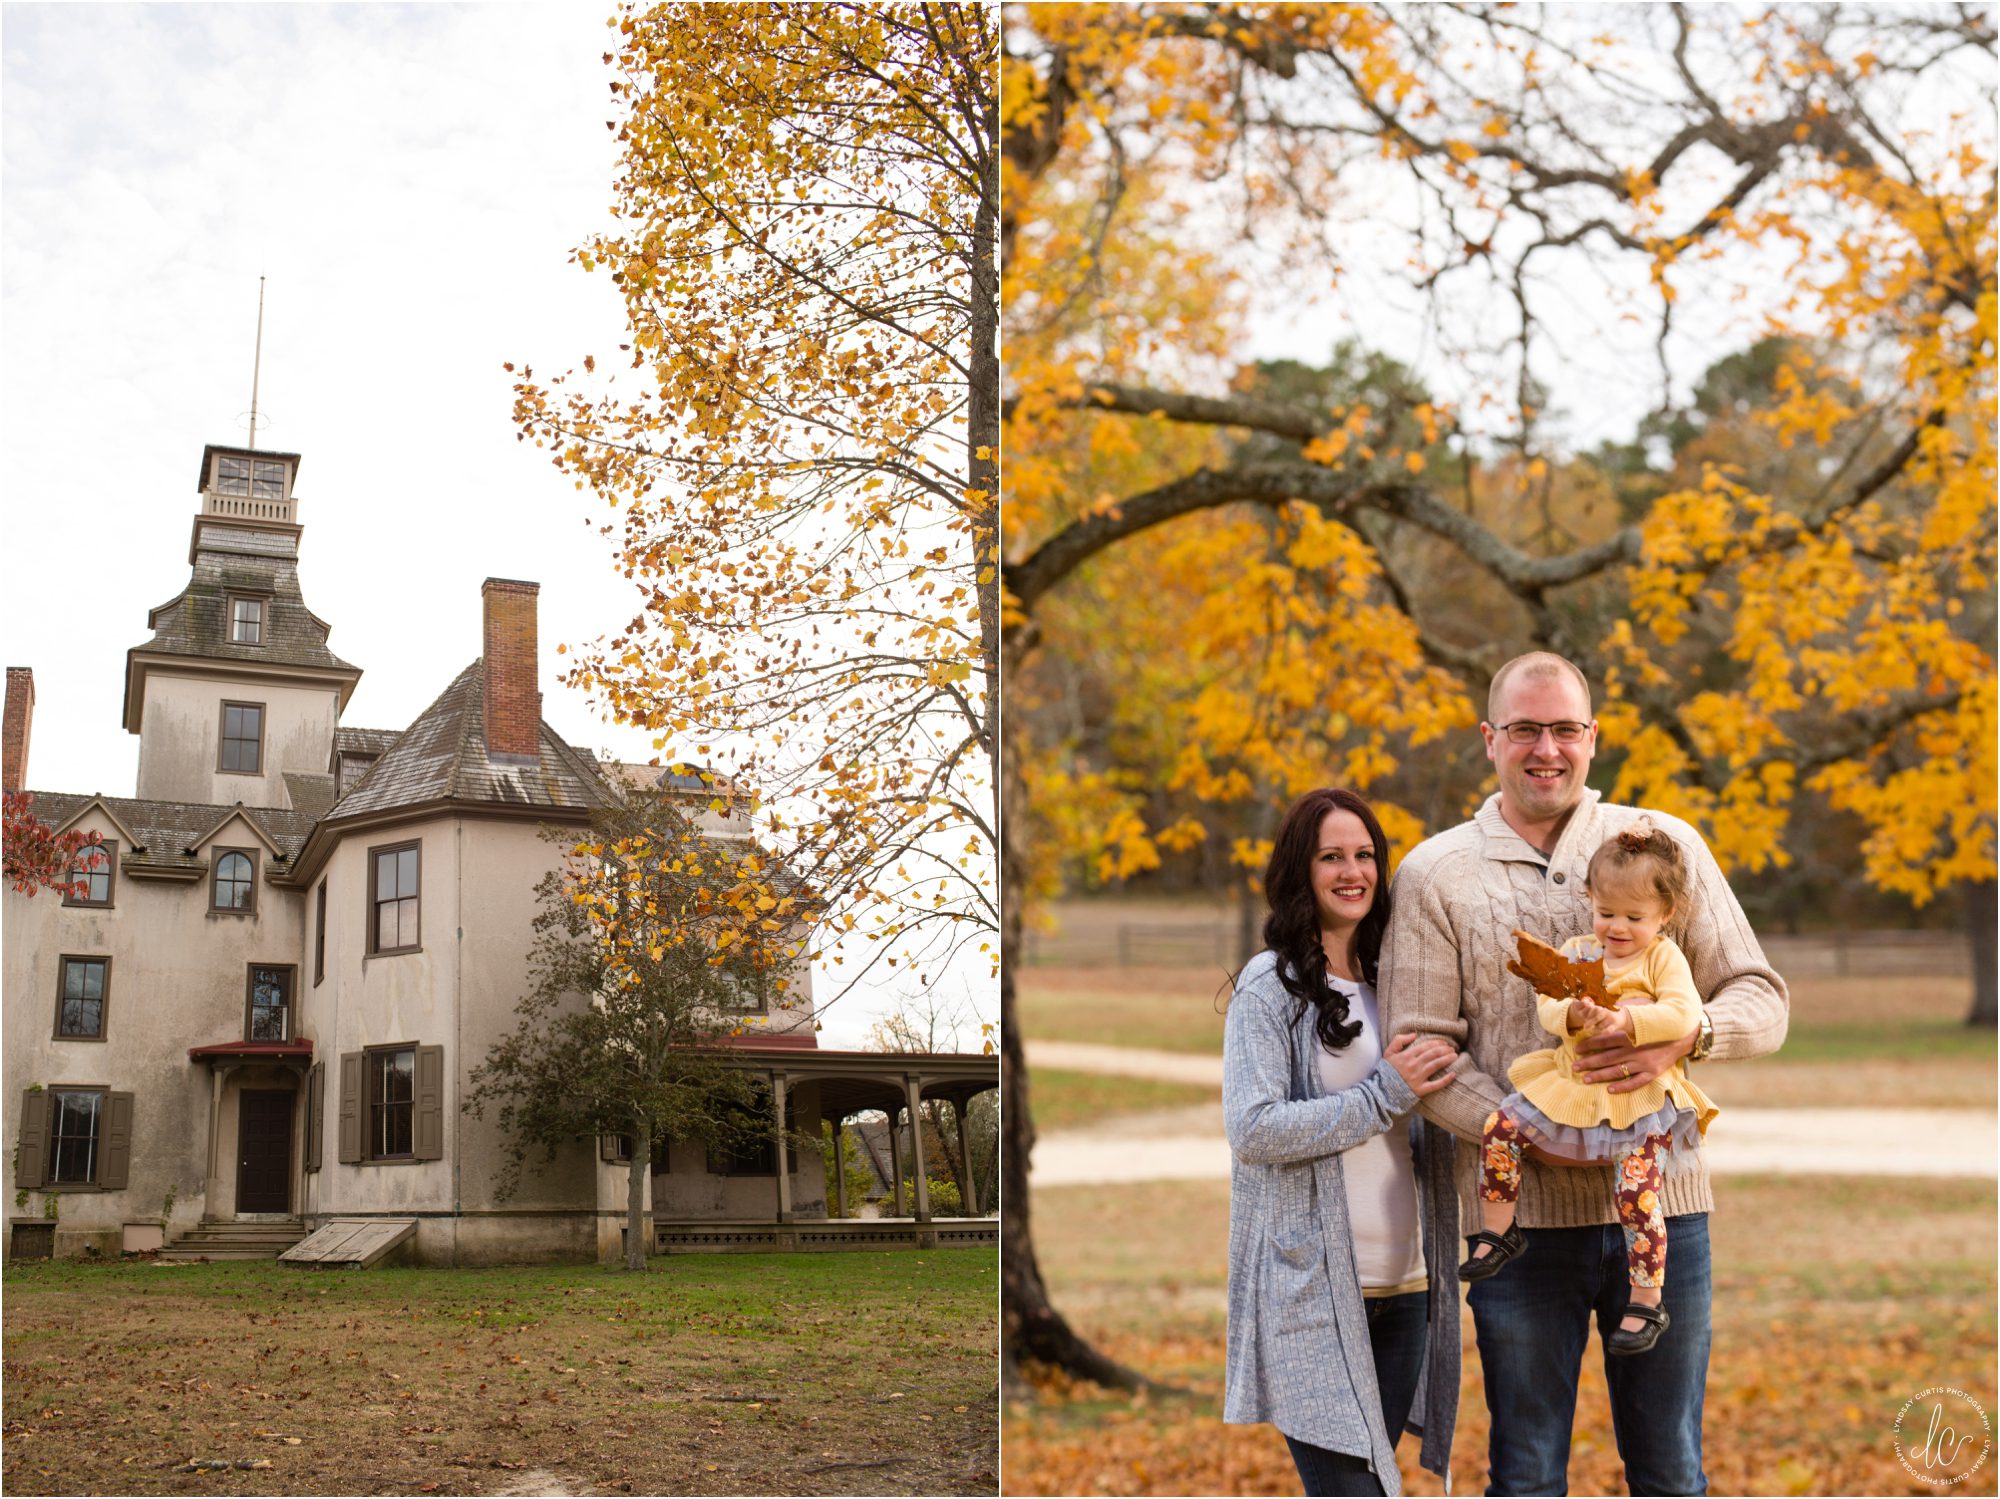 Batsto Village Fall Family Portraits by Lyndsay Curtis Photography